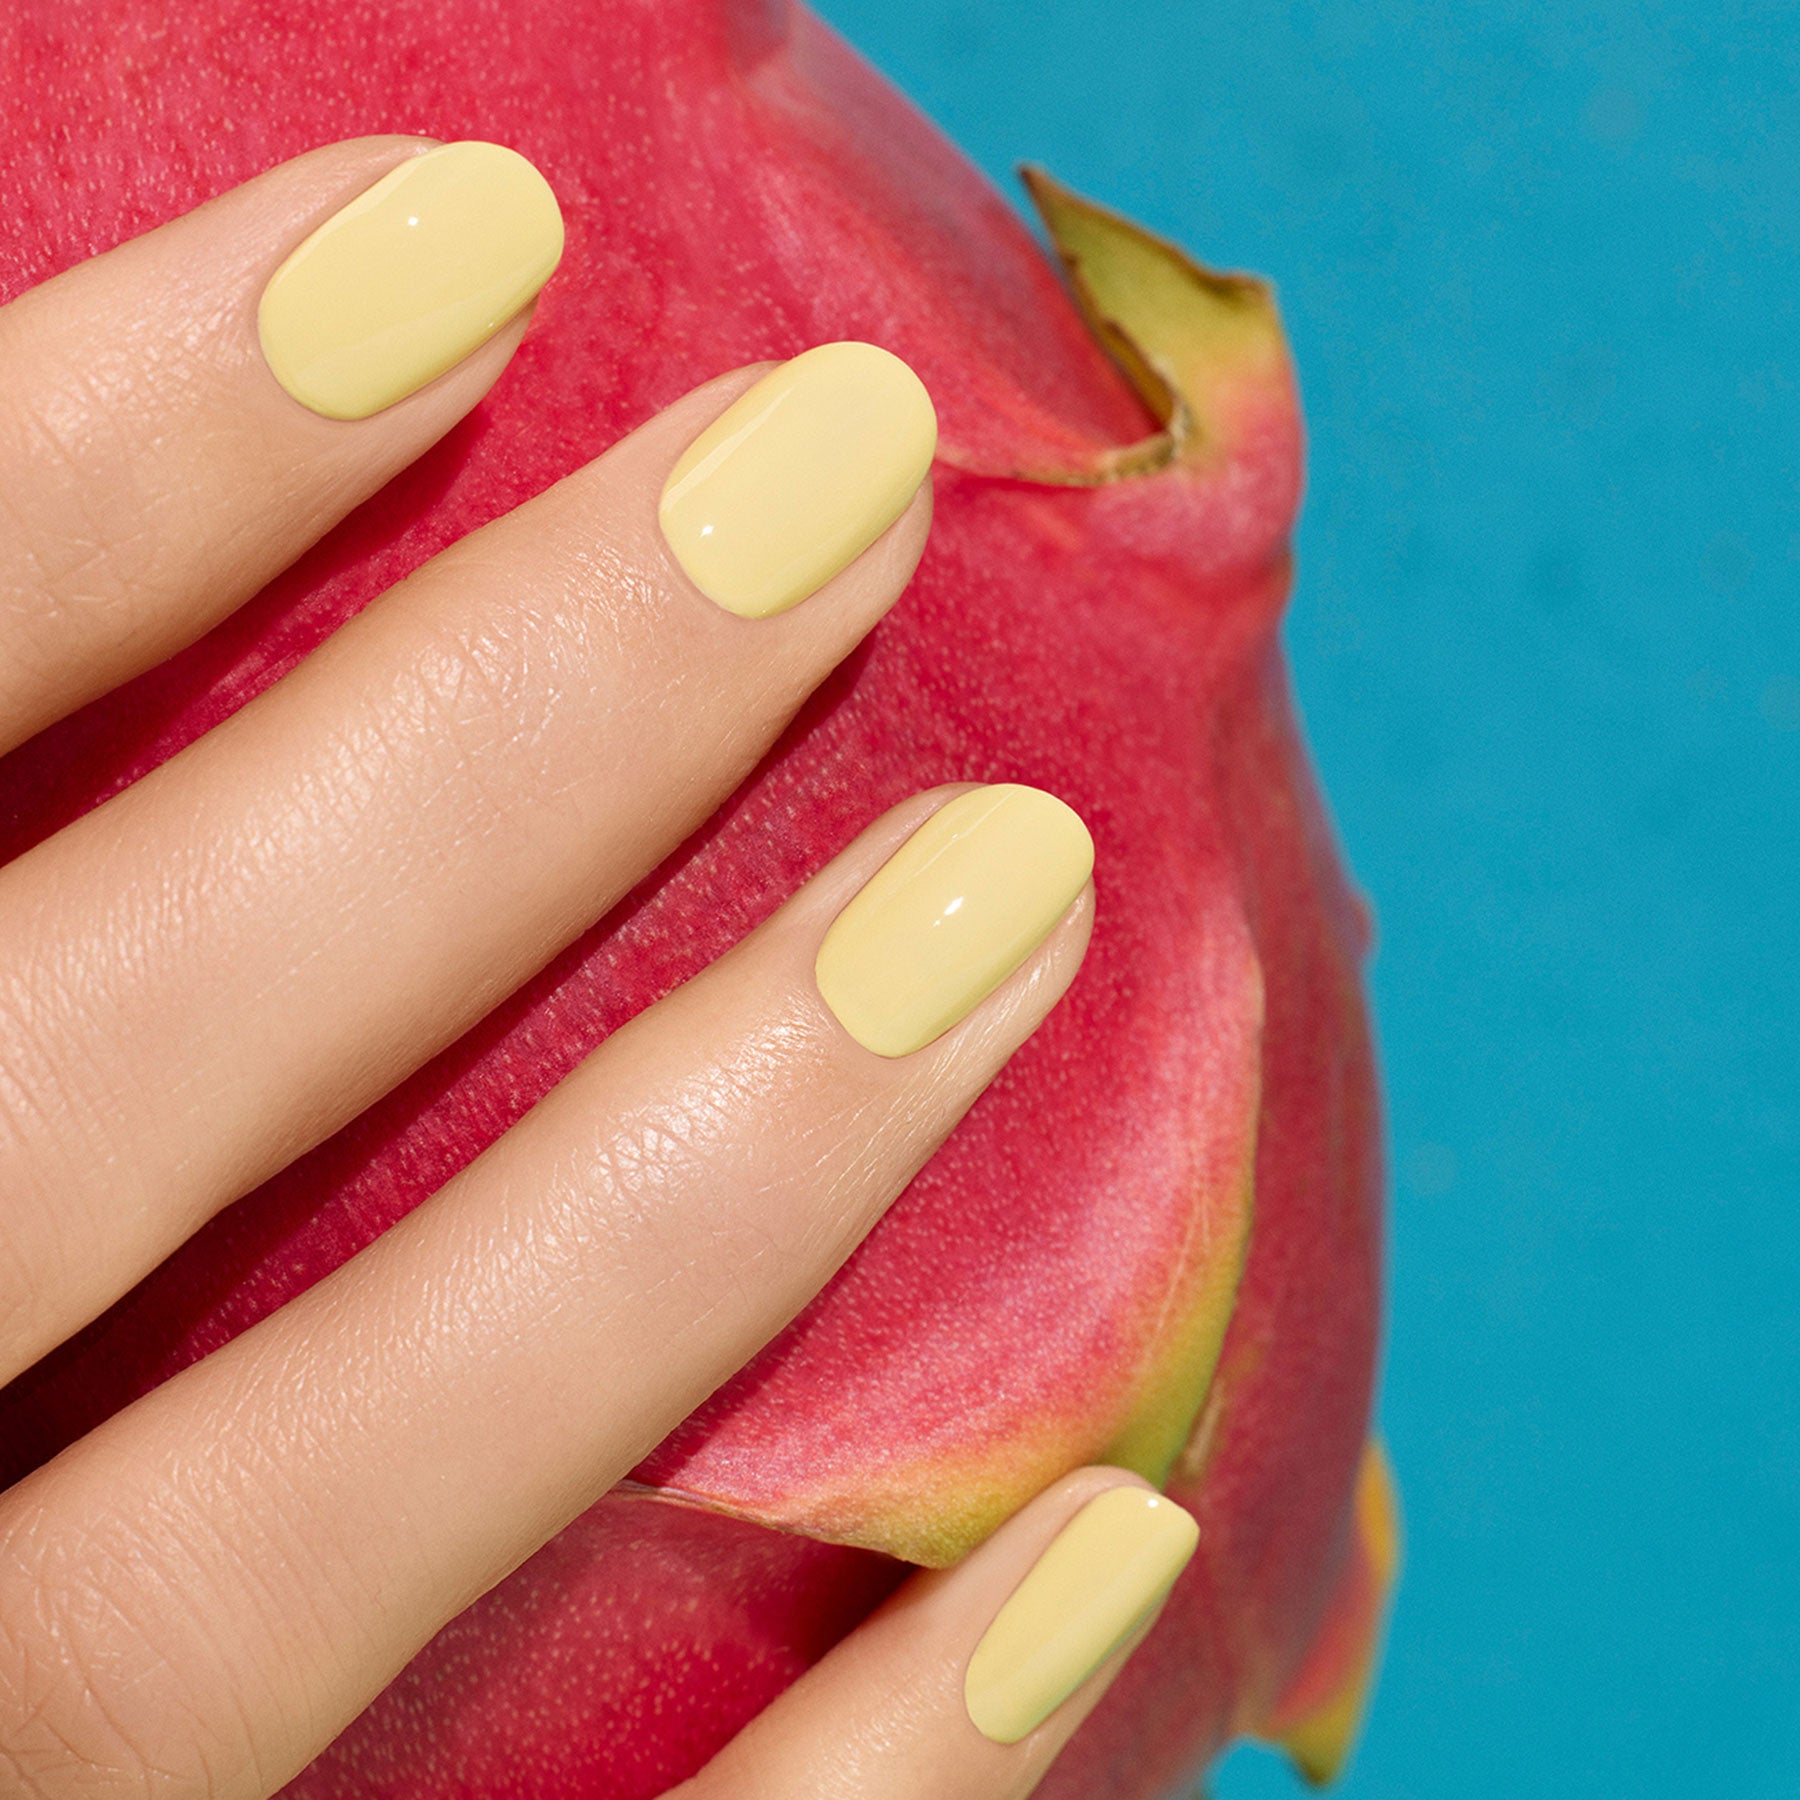 The most insightful stories about Manicure - Medium